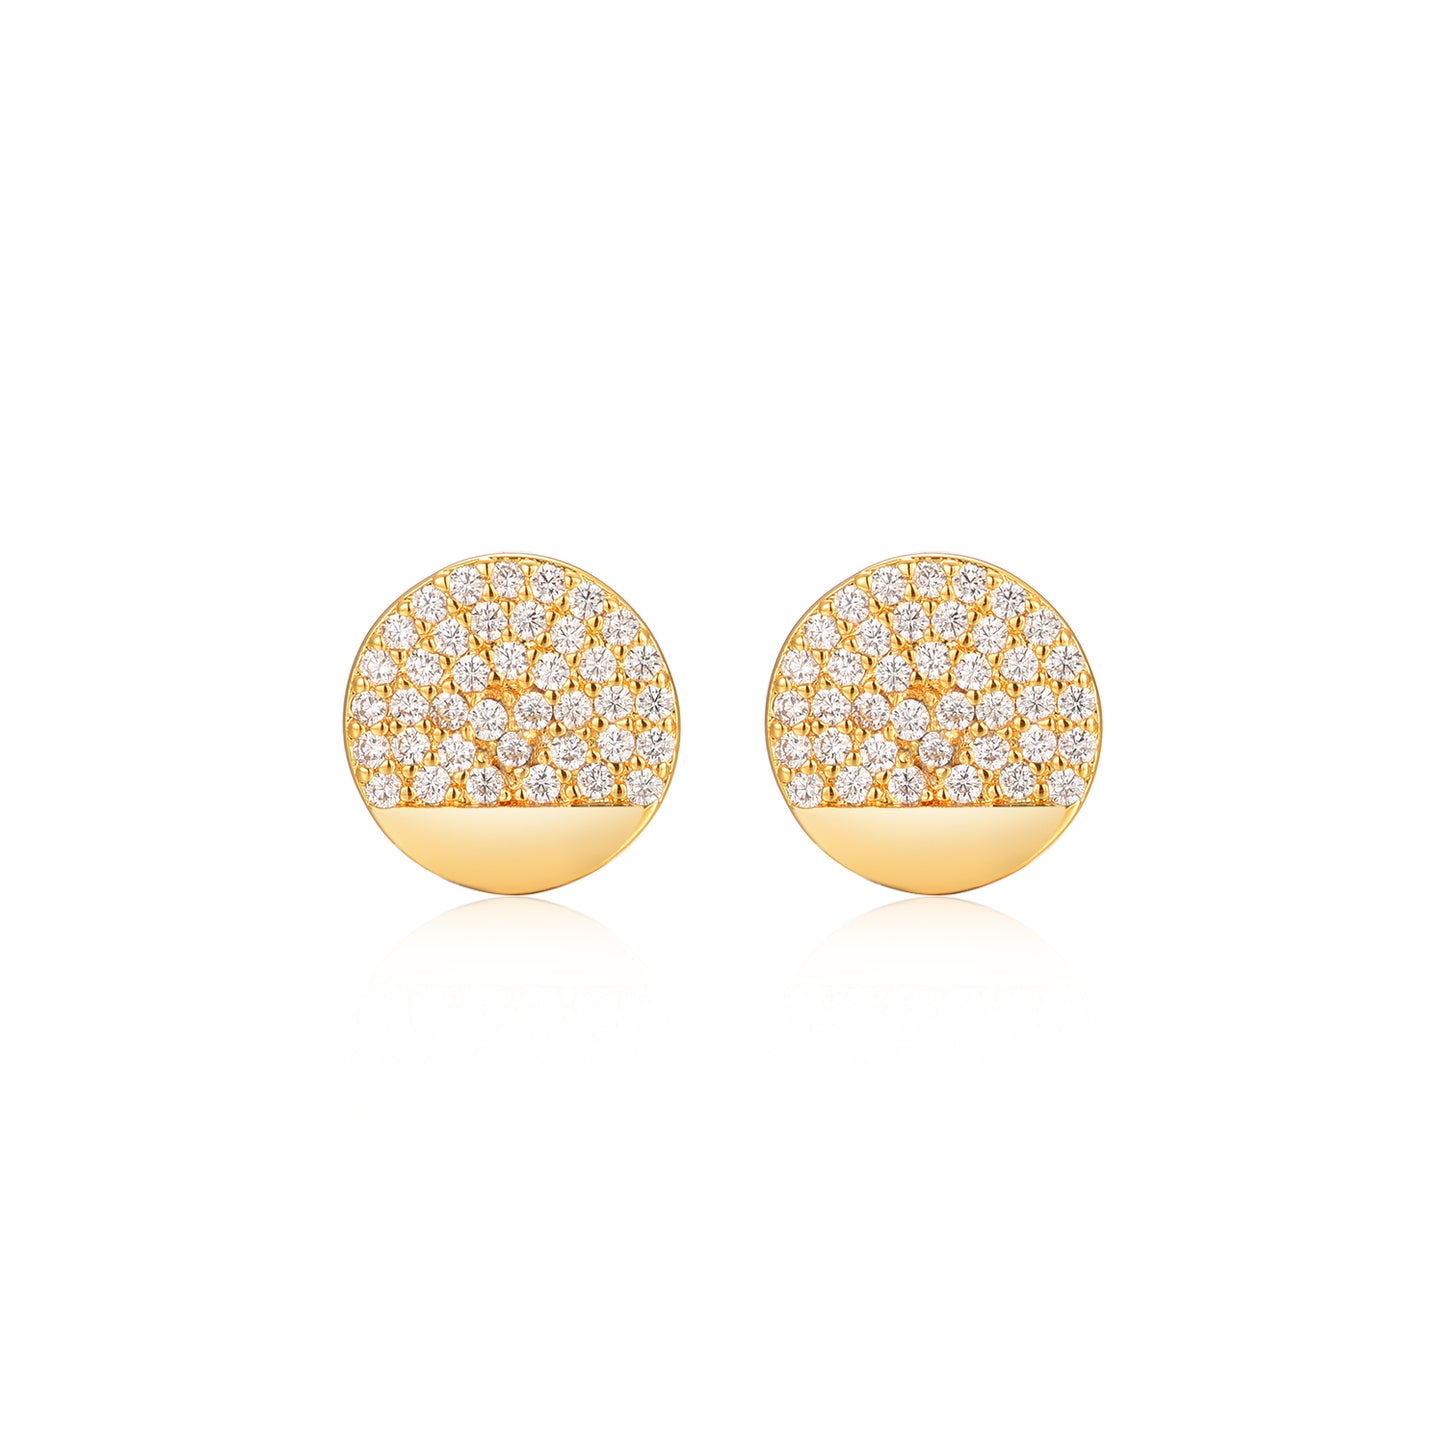 Gold Plated Surgical Steel ¾ CZ Circle Earrings